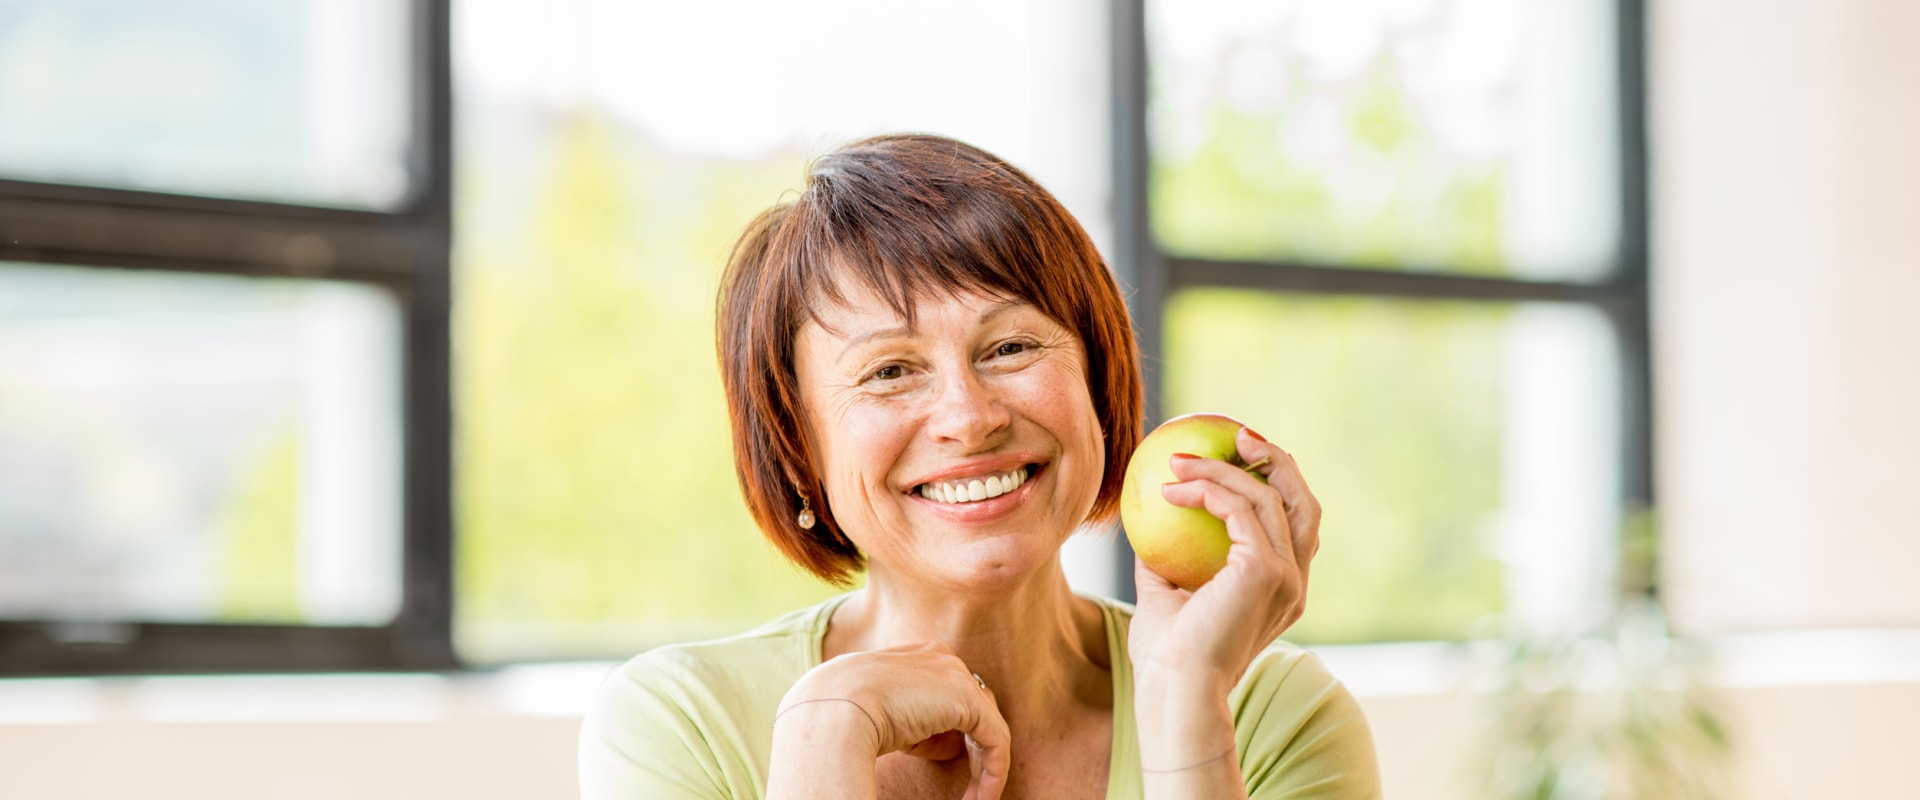 Foods for a Healthy Smile: How Your Diet Affects Oral Health